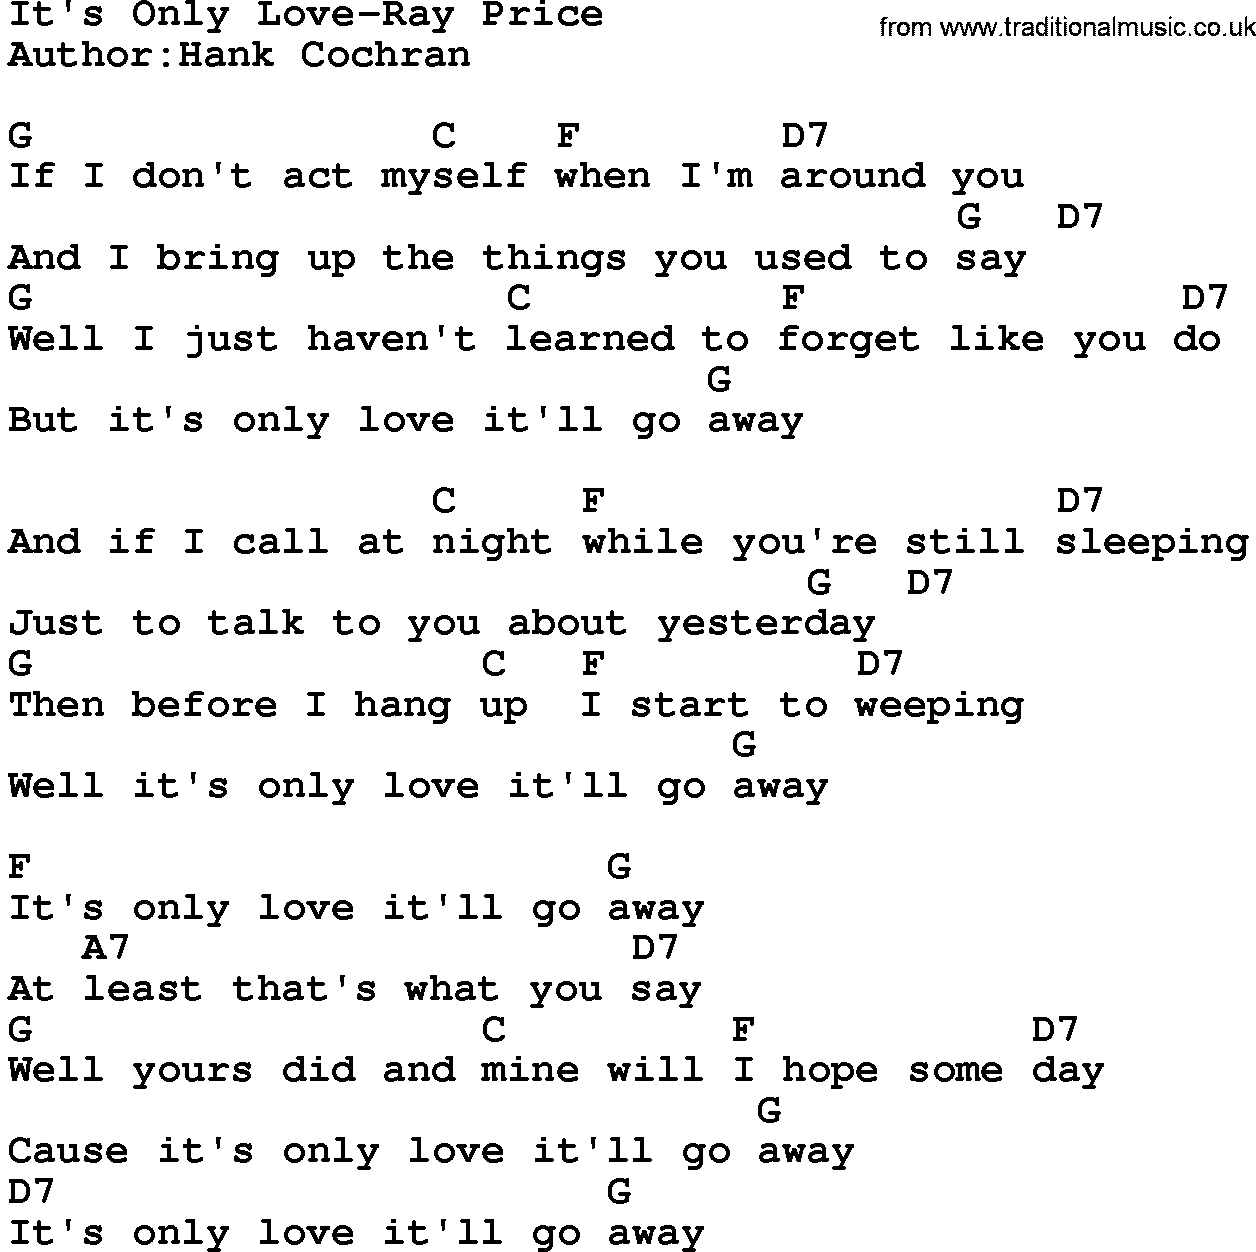 Country music song: It's Only Love-Ray Price lyrics and chords